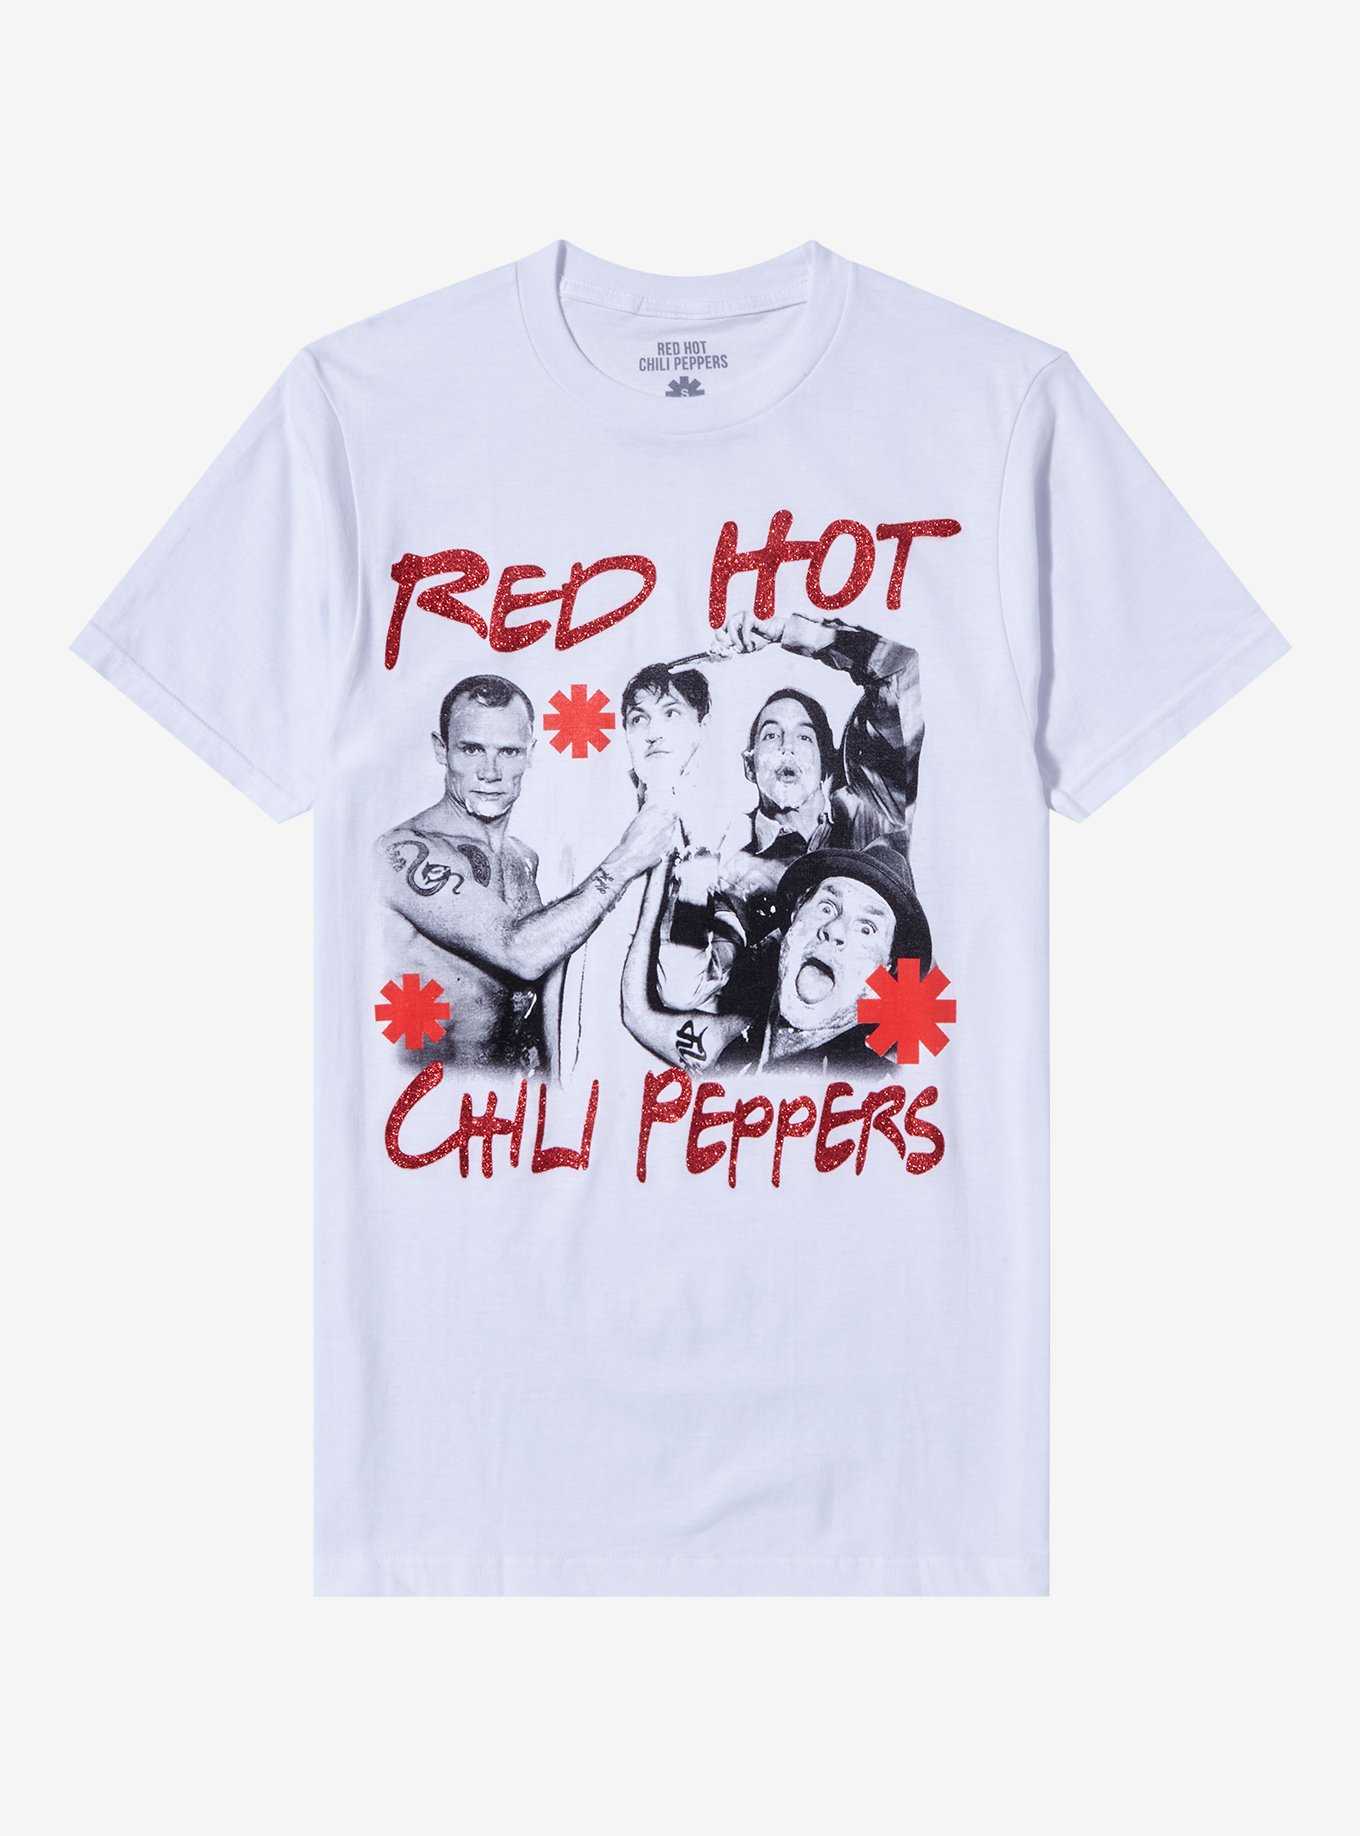 OFFICIAL Red Hot Chili Hot Topic & Peppers Merch T-Shirts 